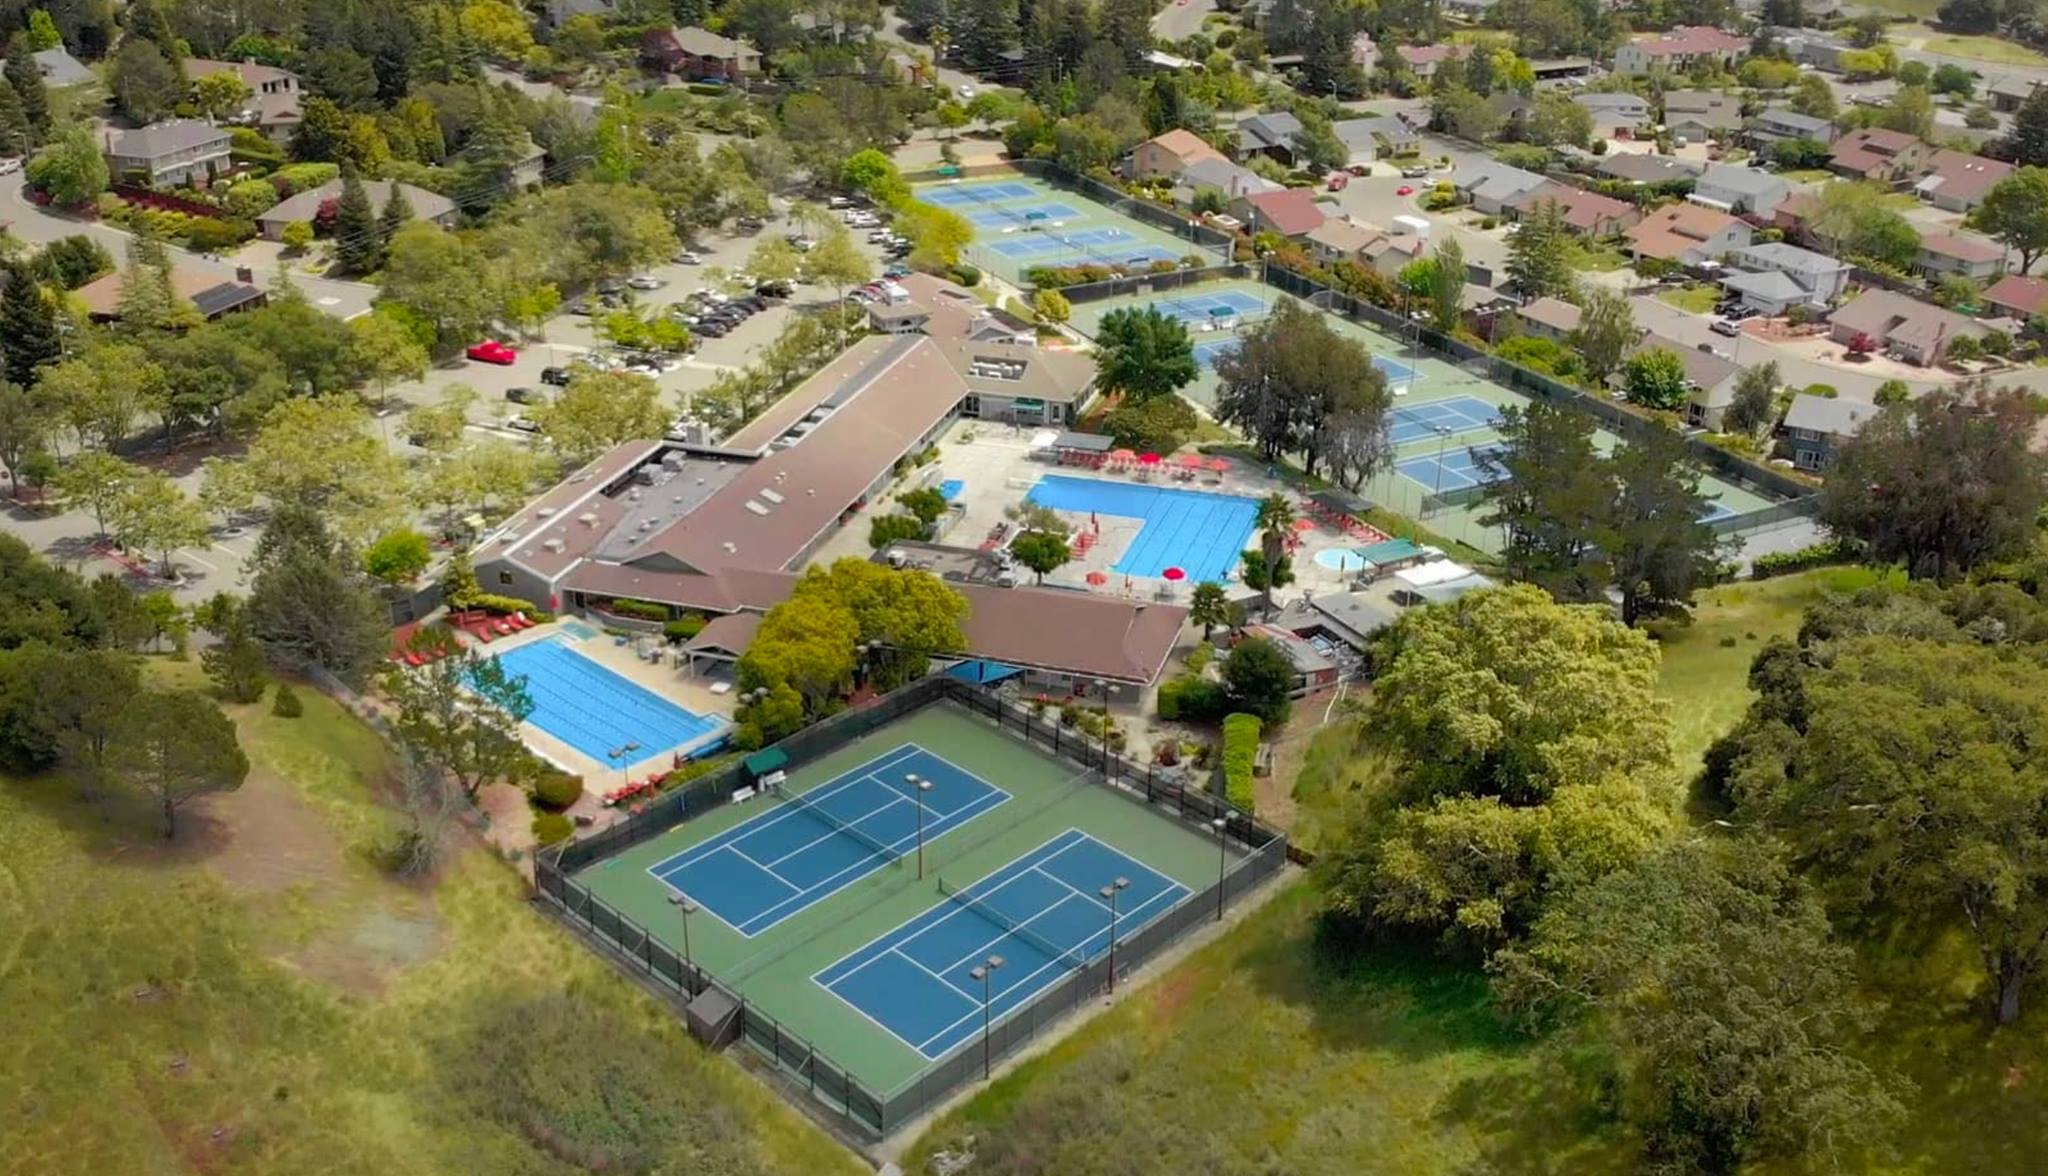 BAY CLUB ACQUIRES KEY SPORTS RESORT IN MARIN COUNTY CONTINUING THEIR ONGOING BAY AREA GROWTH STRATEGY